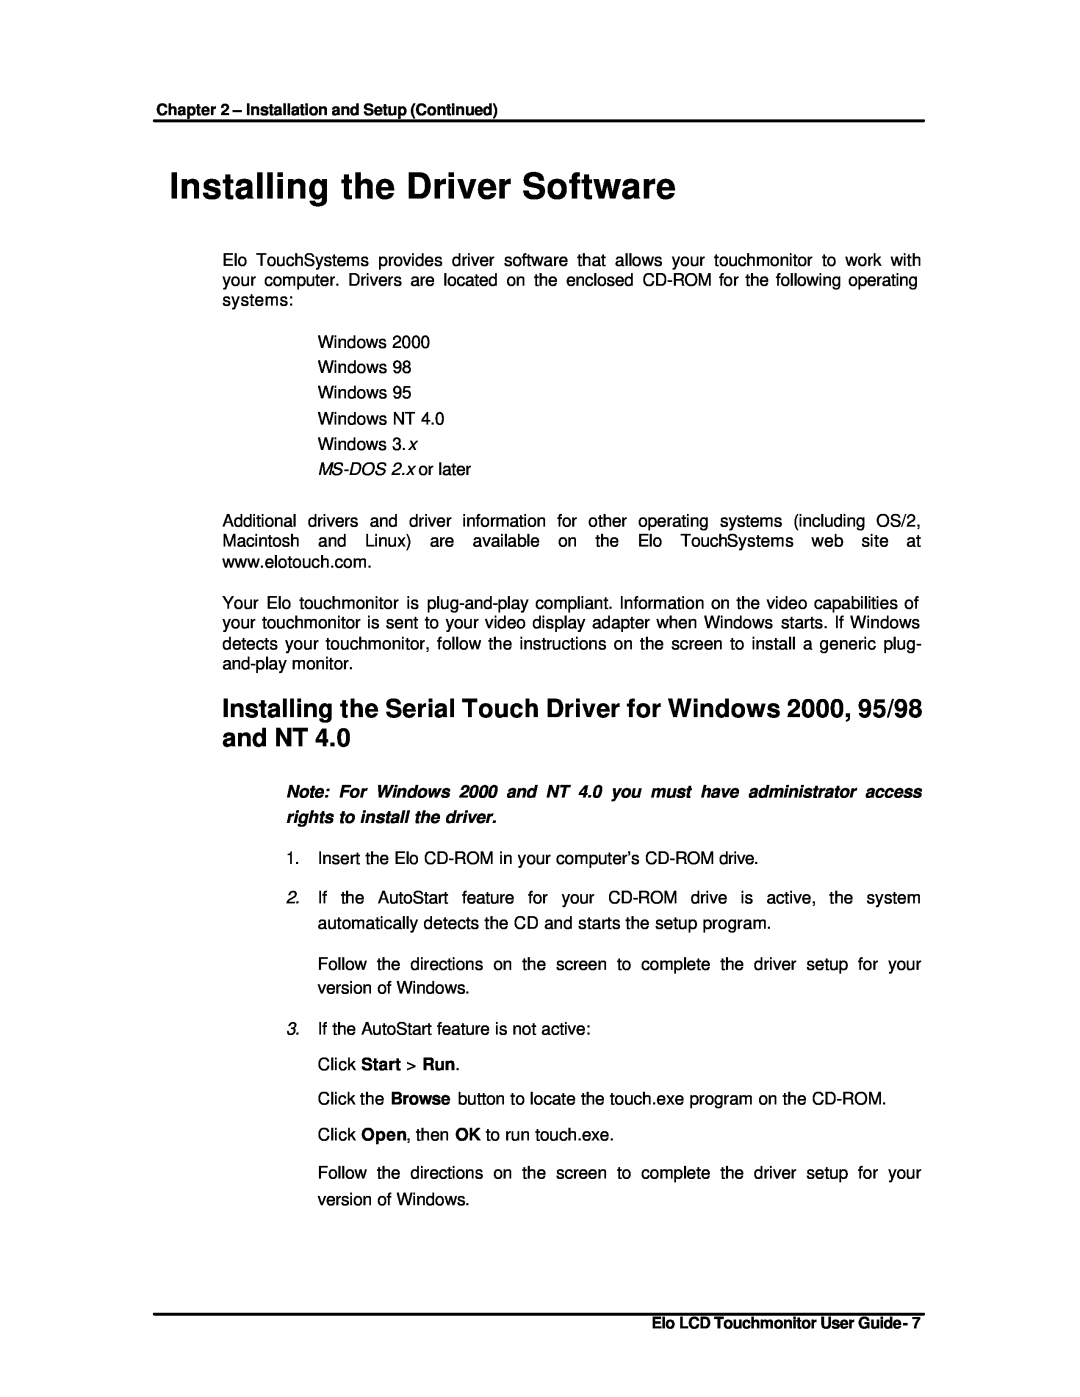 Elo TouchSystems ET1825L-8SWA-1 manual Installing the Driver Software, MS-DOS 2.x or later 